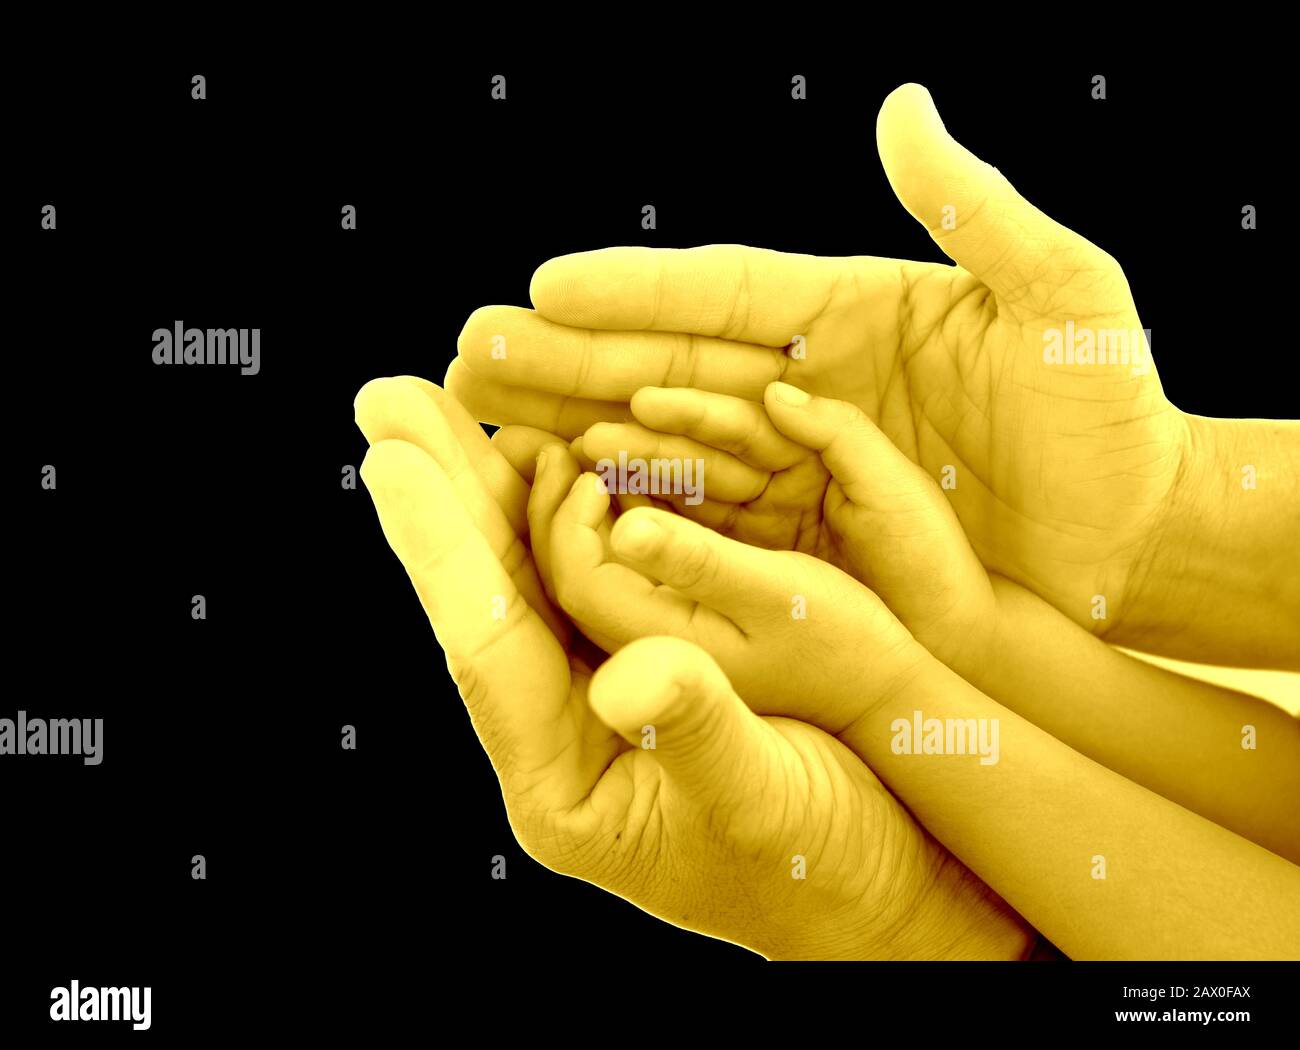 protection hand for support children hand on white backgroungolden d Stock Photo